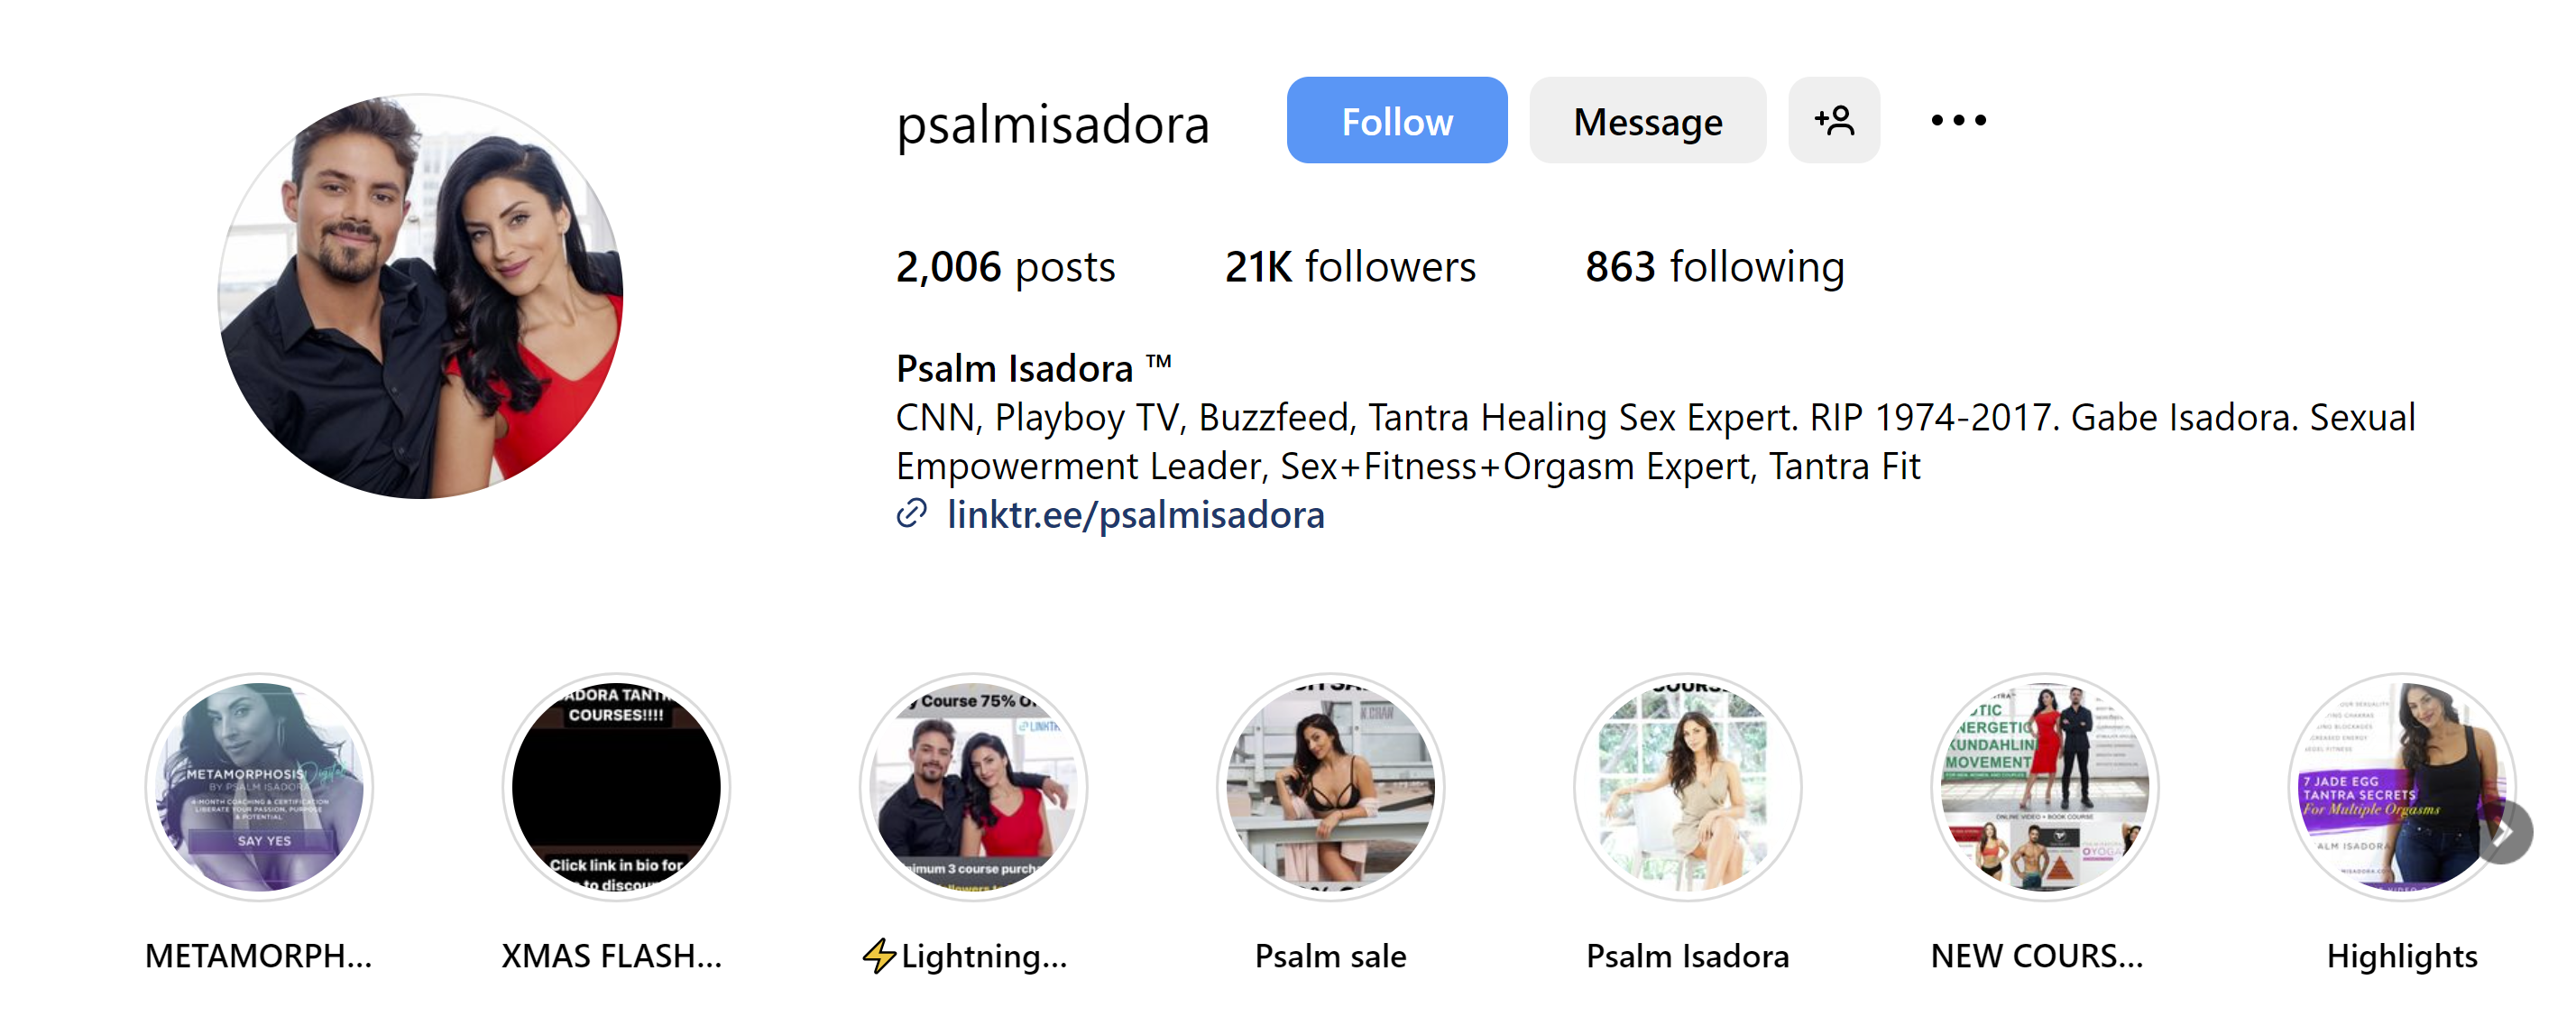 Who Is Psalm Isadora